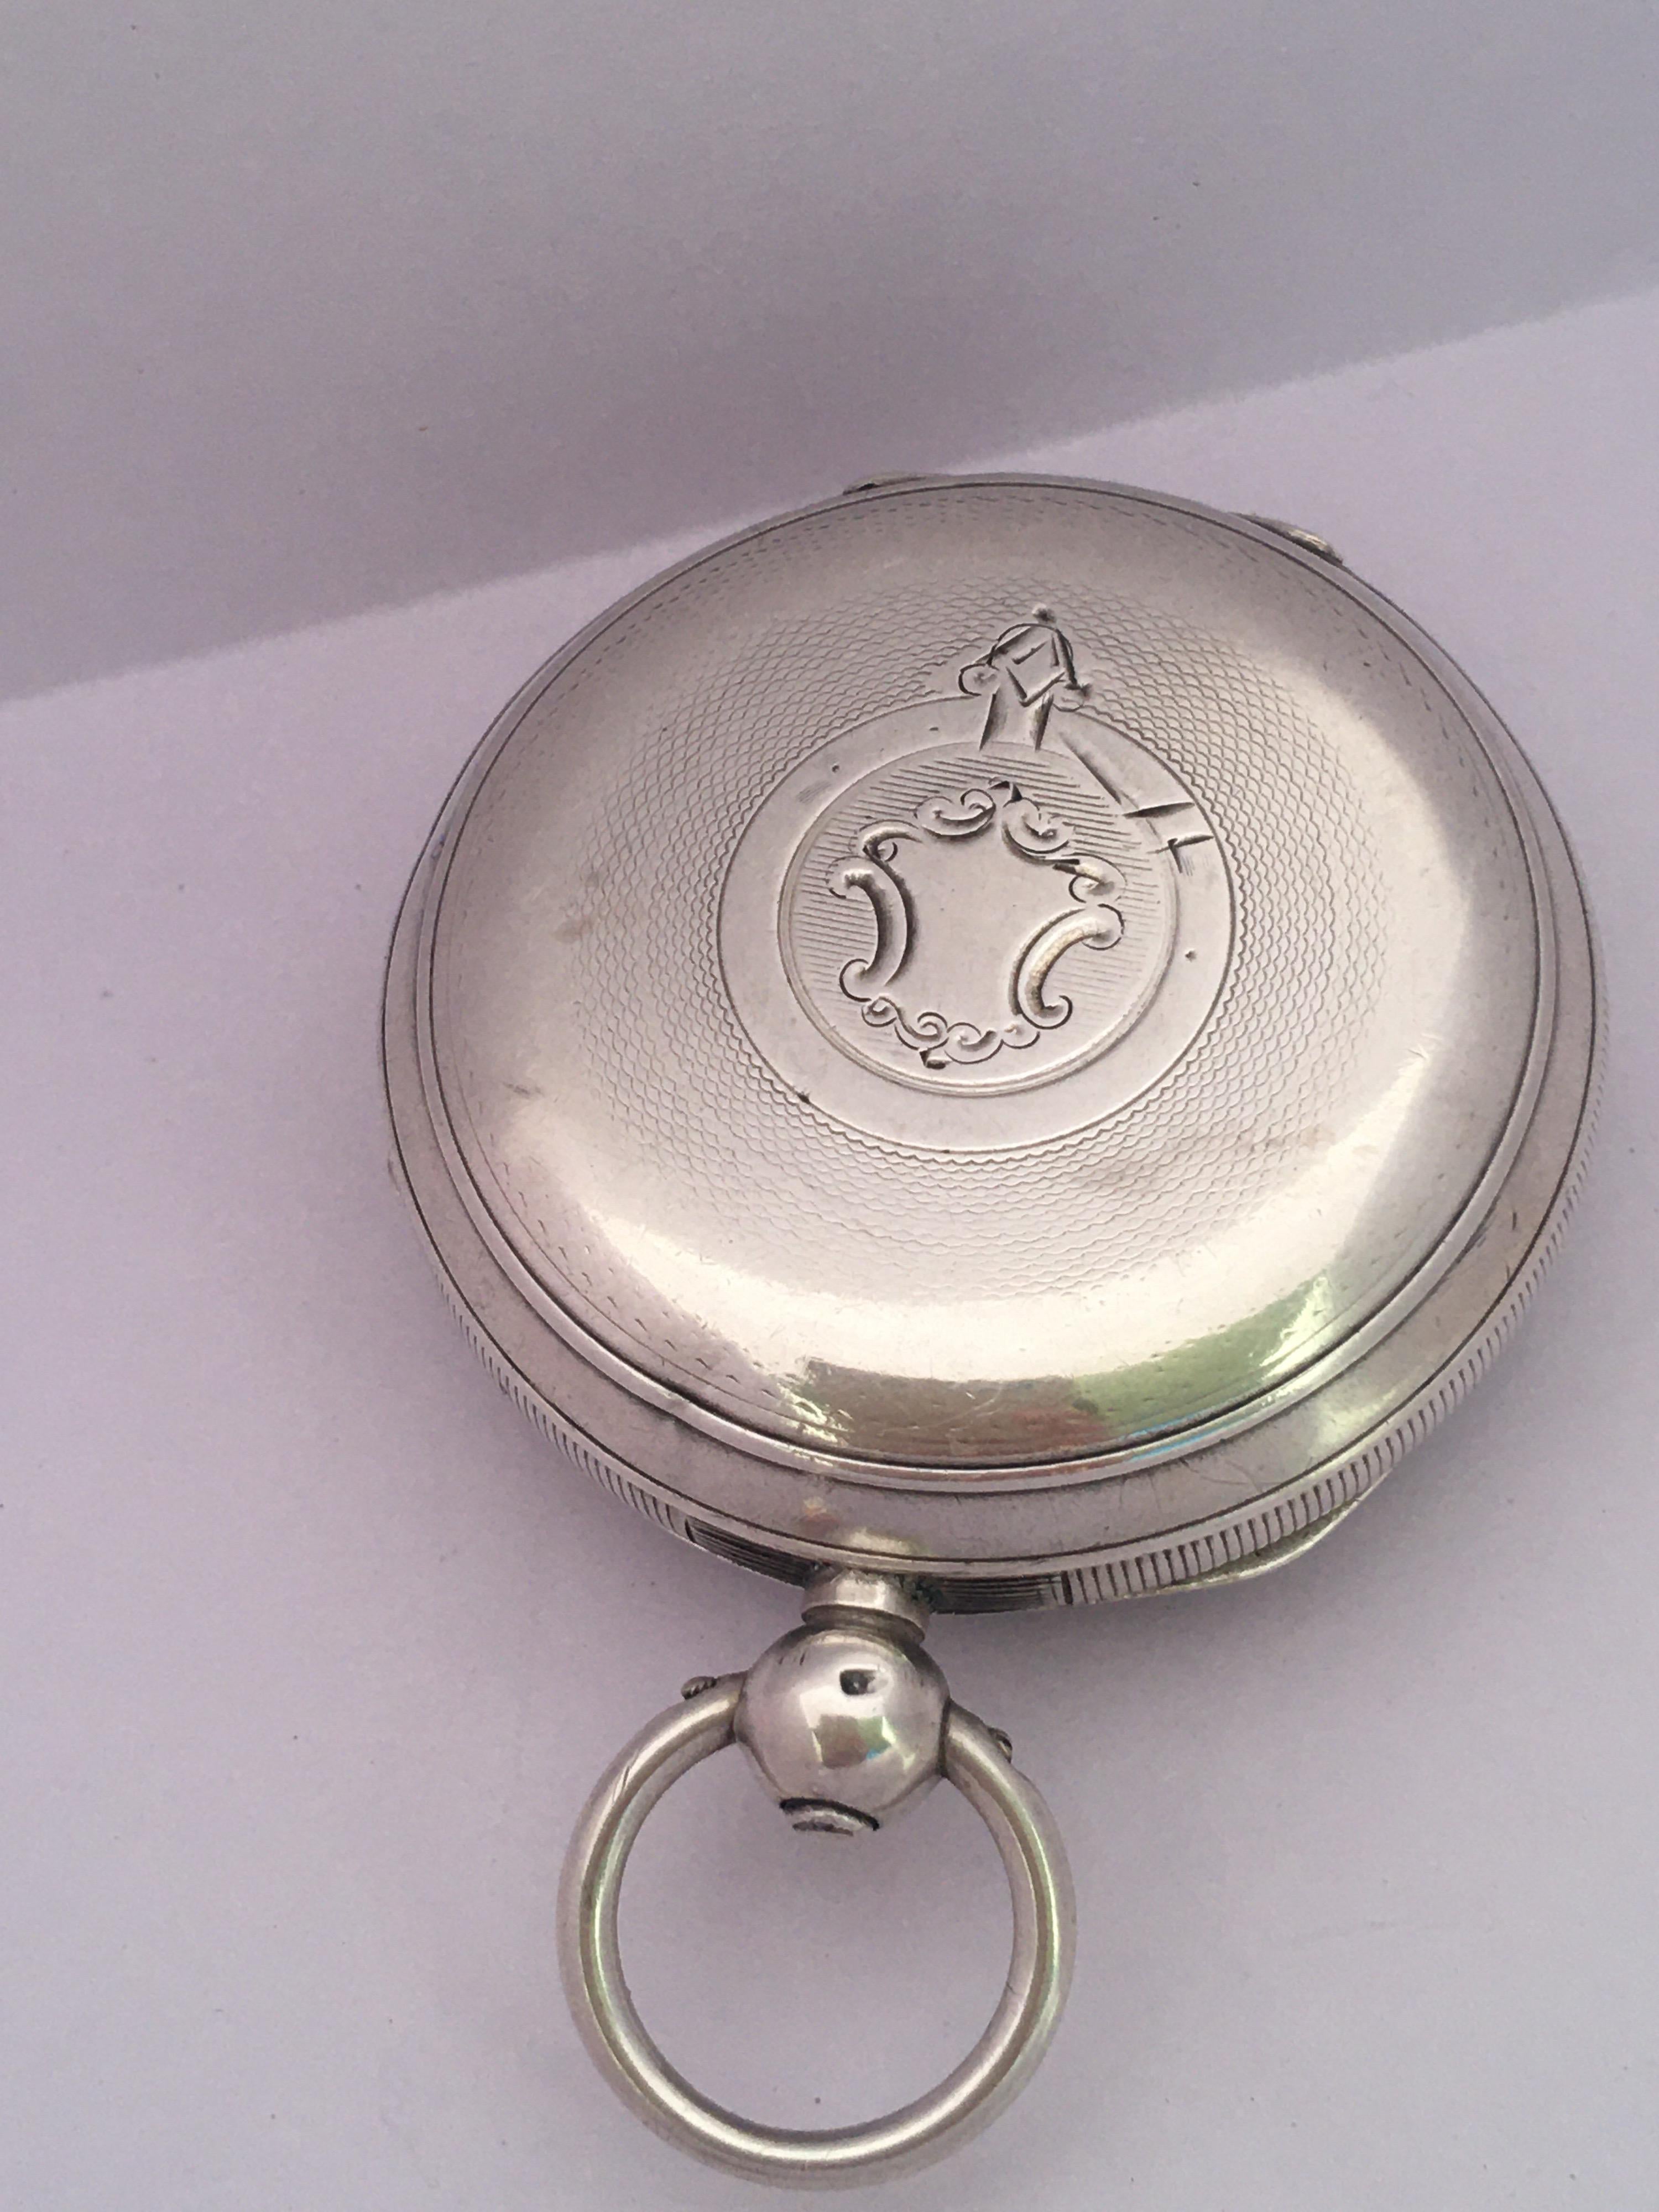 Antique Silver Key-Winding Pocket Watch Signed by Dent 9